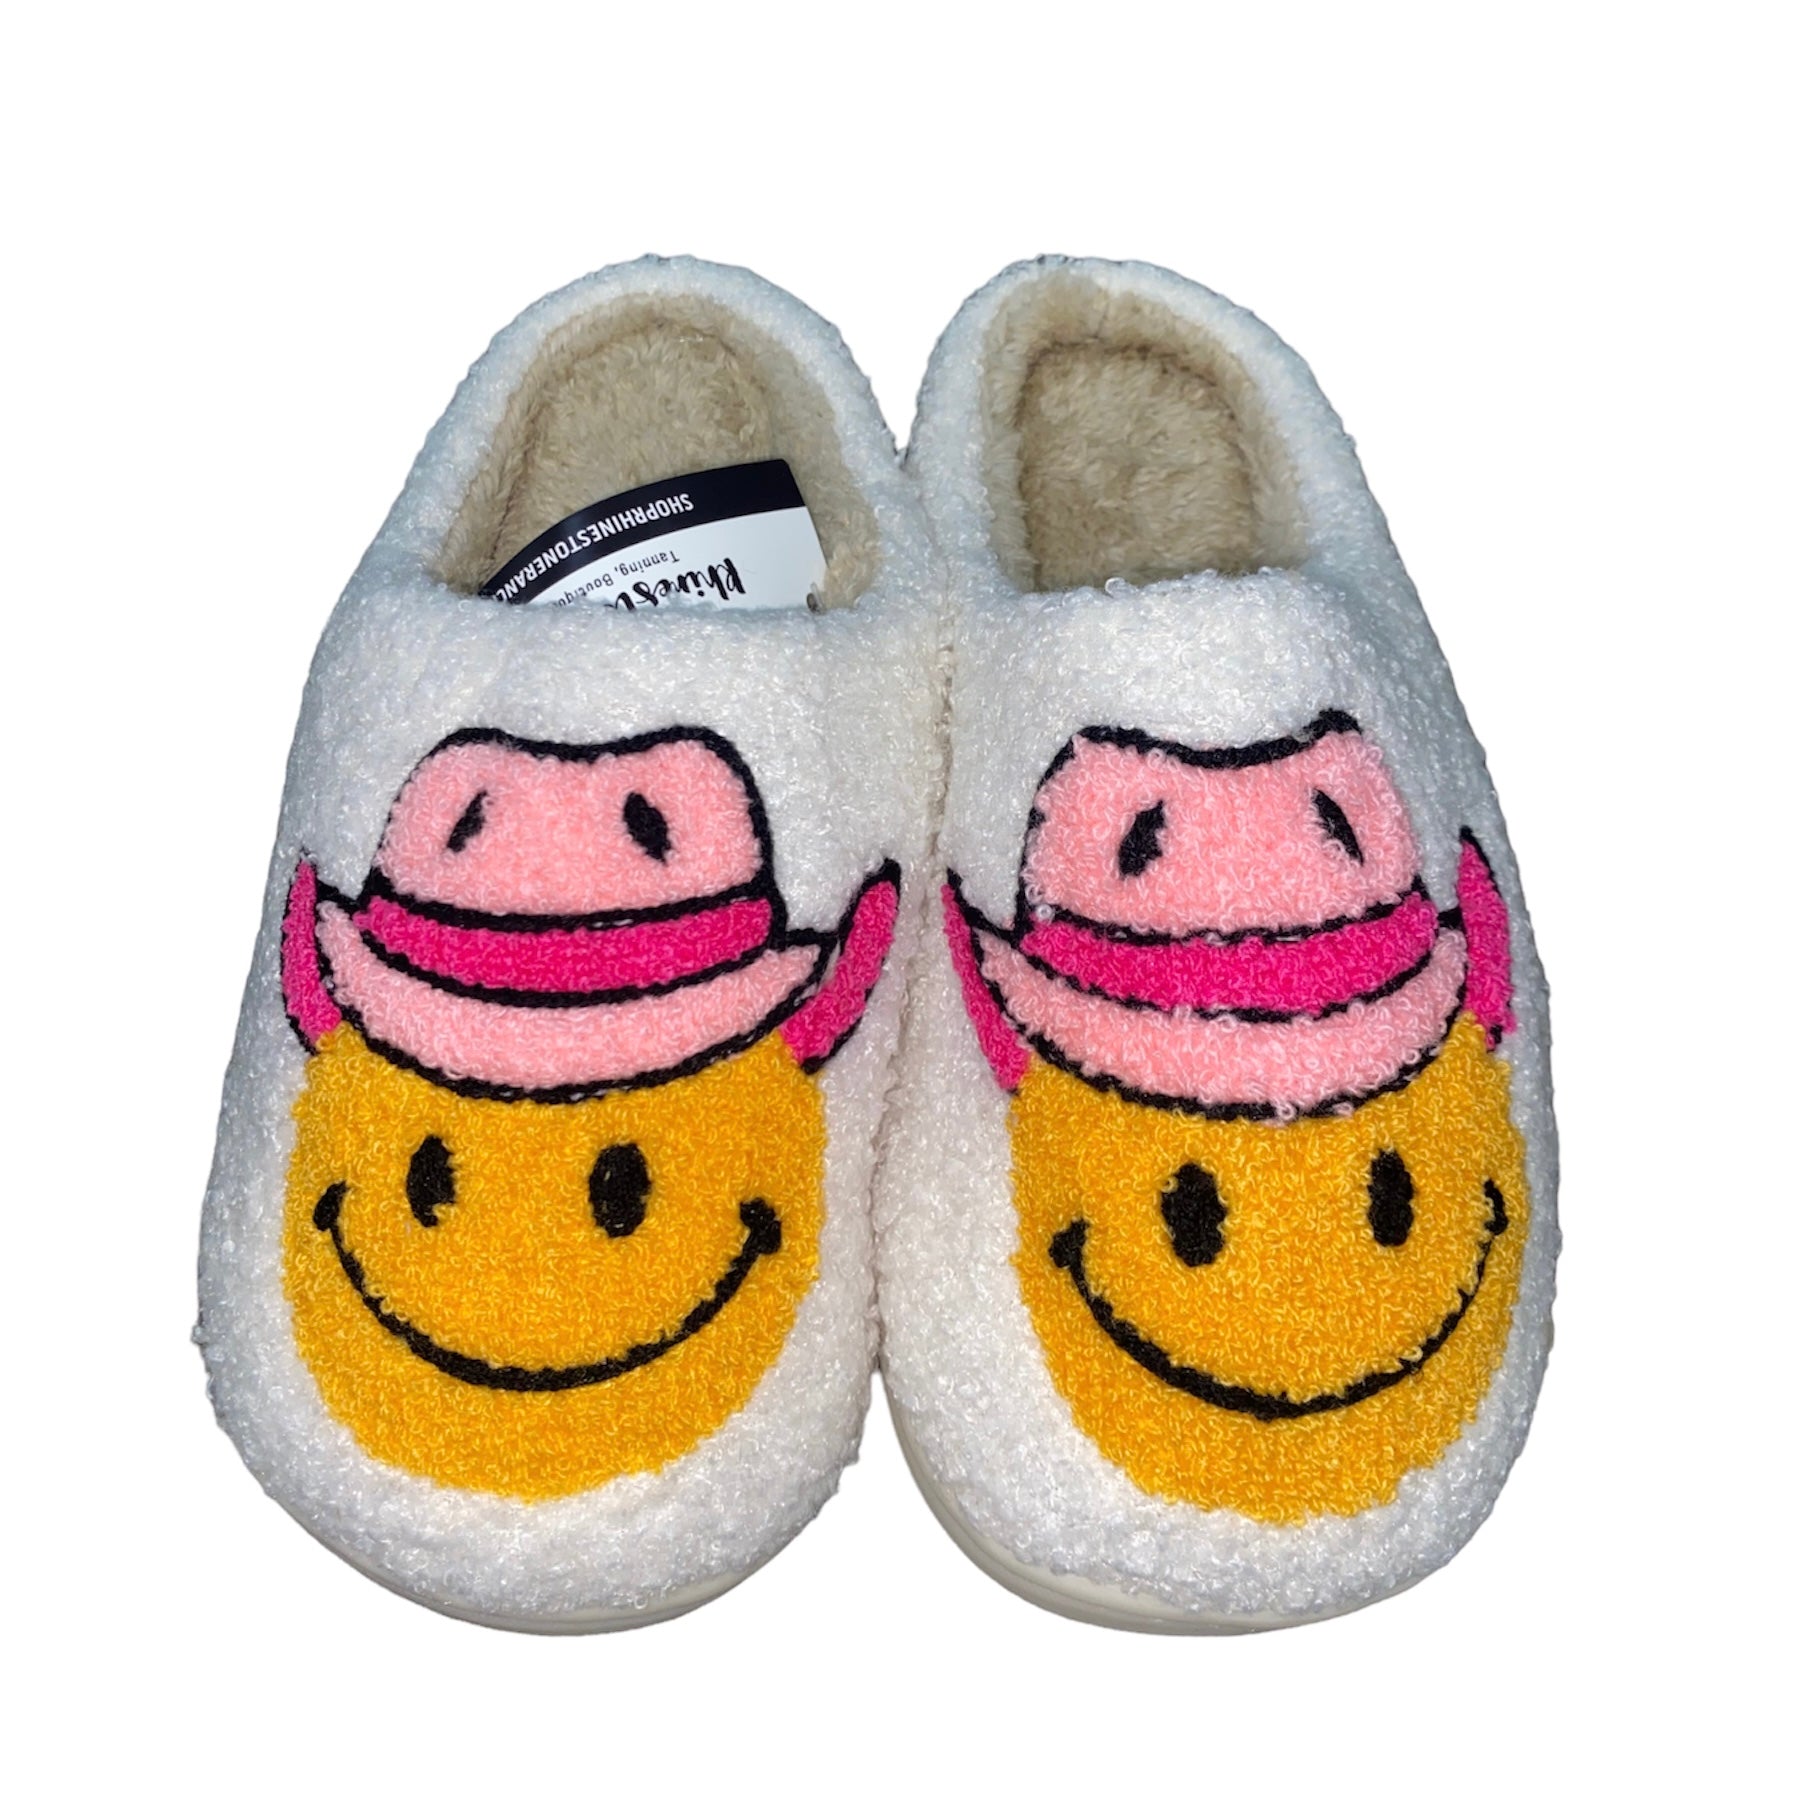 Introducing the Ultimate Toddler Smiley Face Slippers Comfort and Fun in Every Step